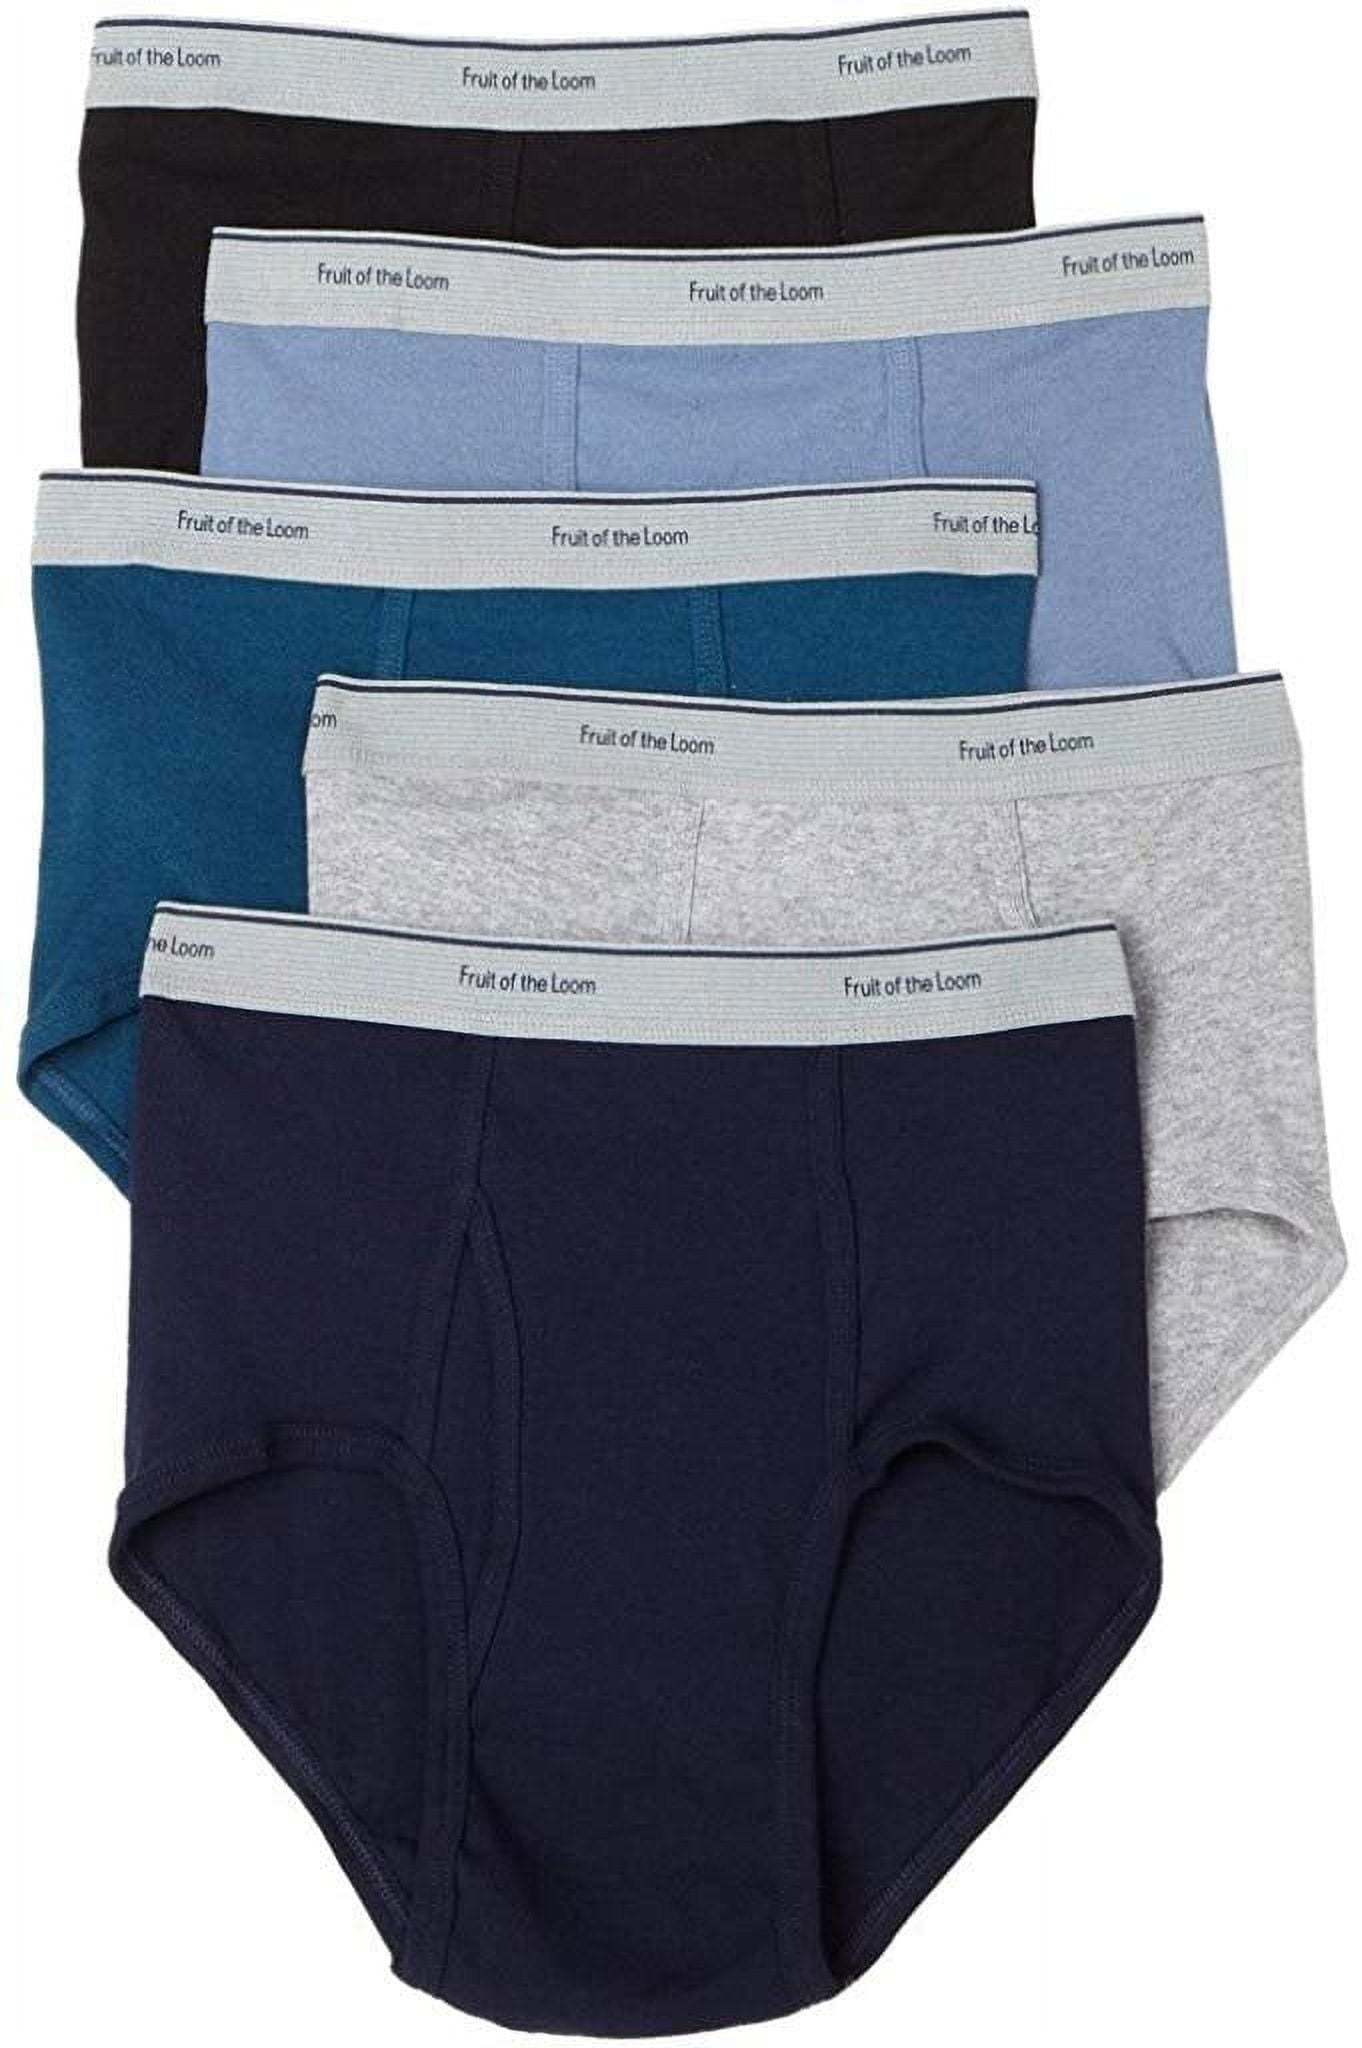 Fruit of the Loom Men's 5-Pack Assorted Briefs - Colors May Vary